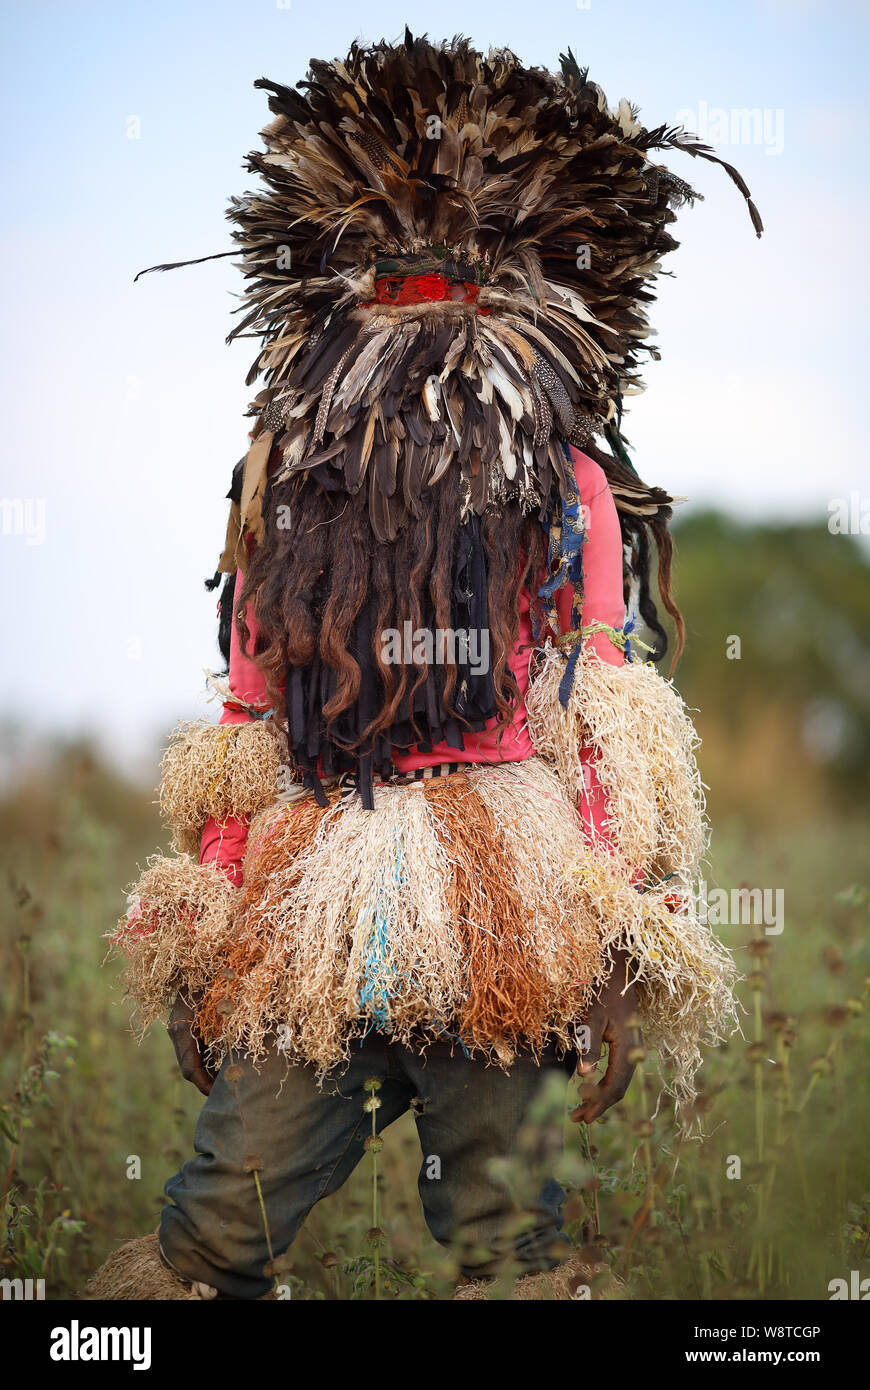 Traditional Nyau dancer with face mask at a Gule Wamkulu ceremony in remote village near Ntchisi. Malawi is one of the poorest countries in the world Stock Photo